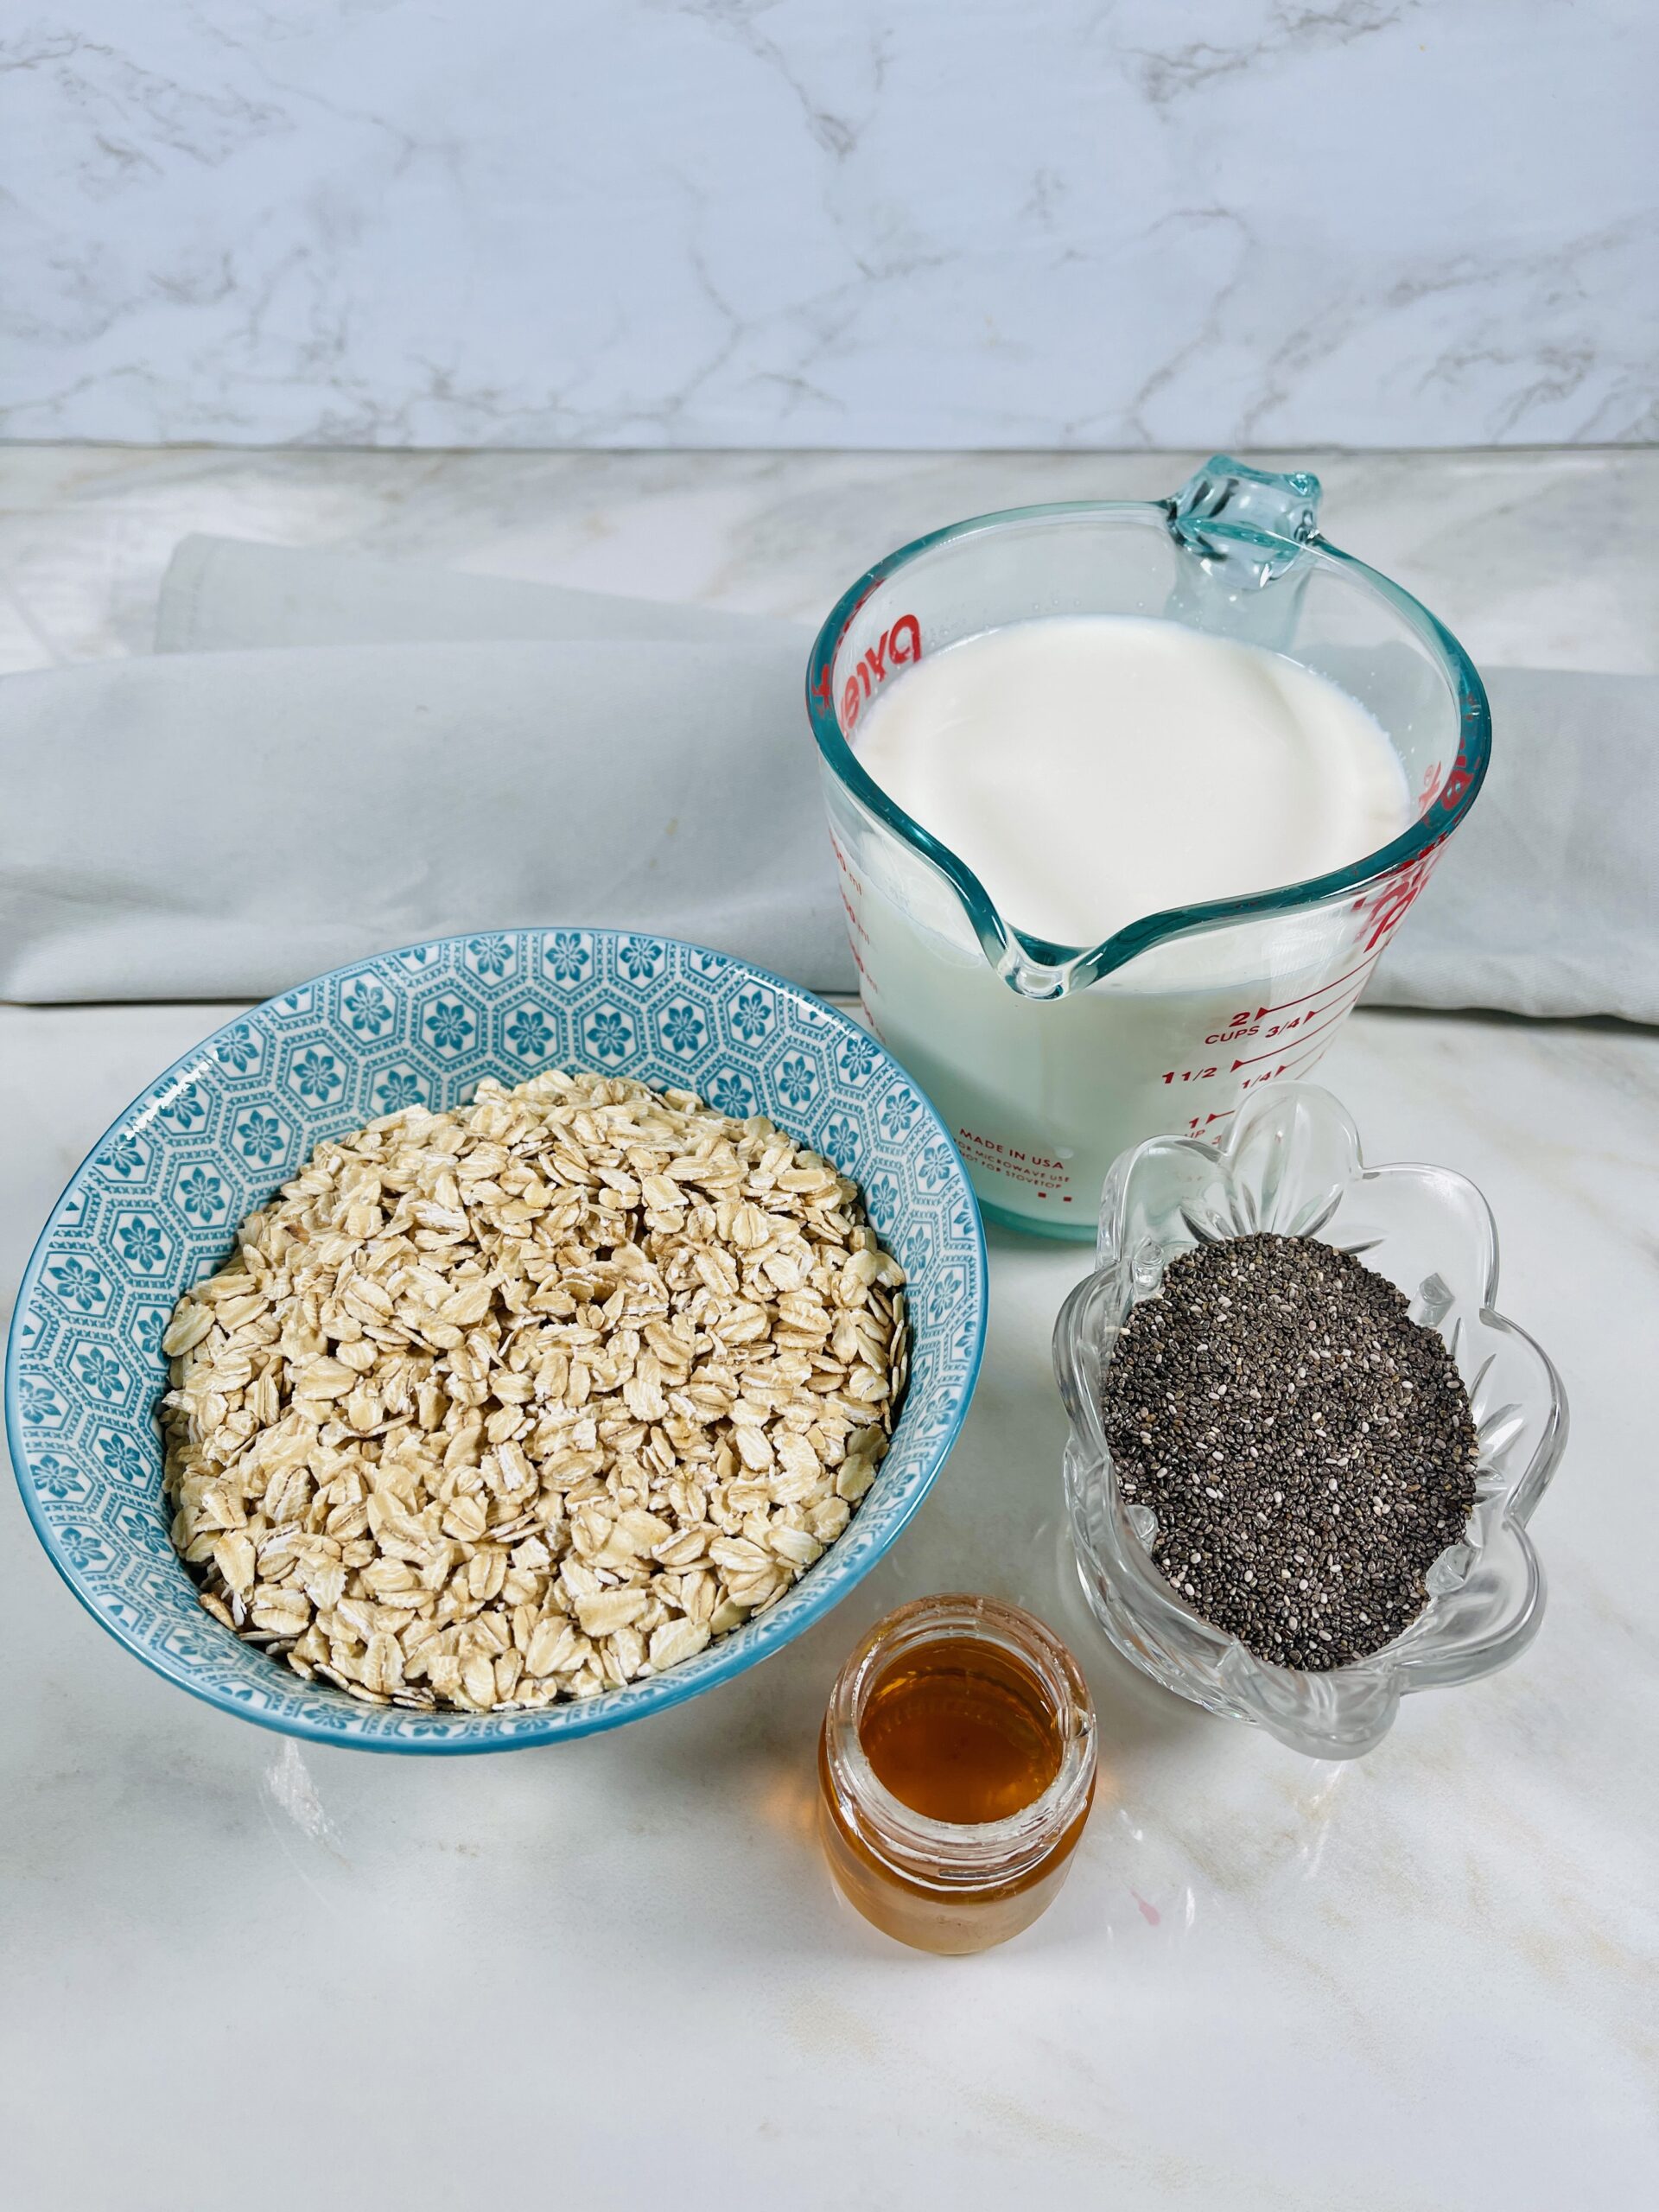 Ingredients for Overnight oats